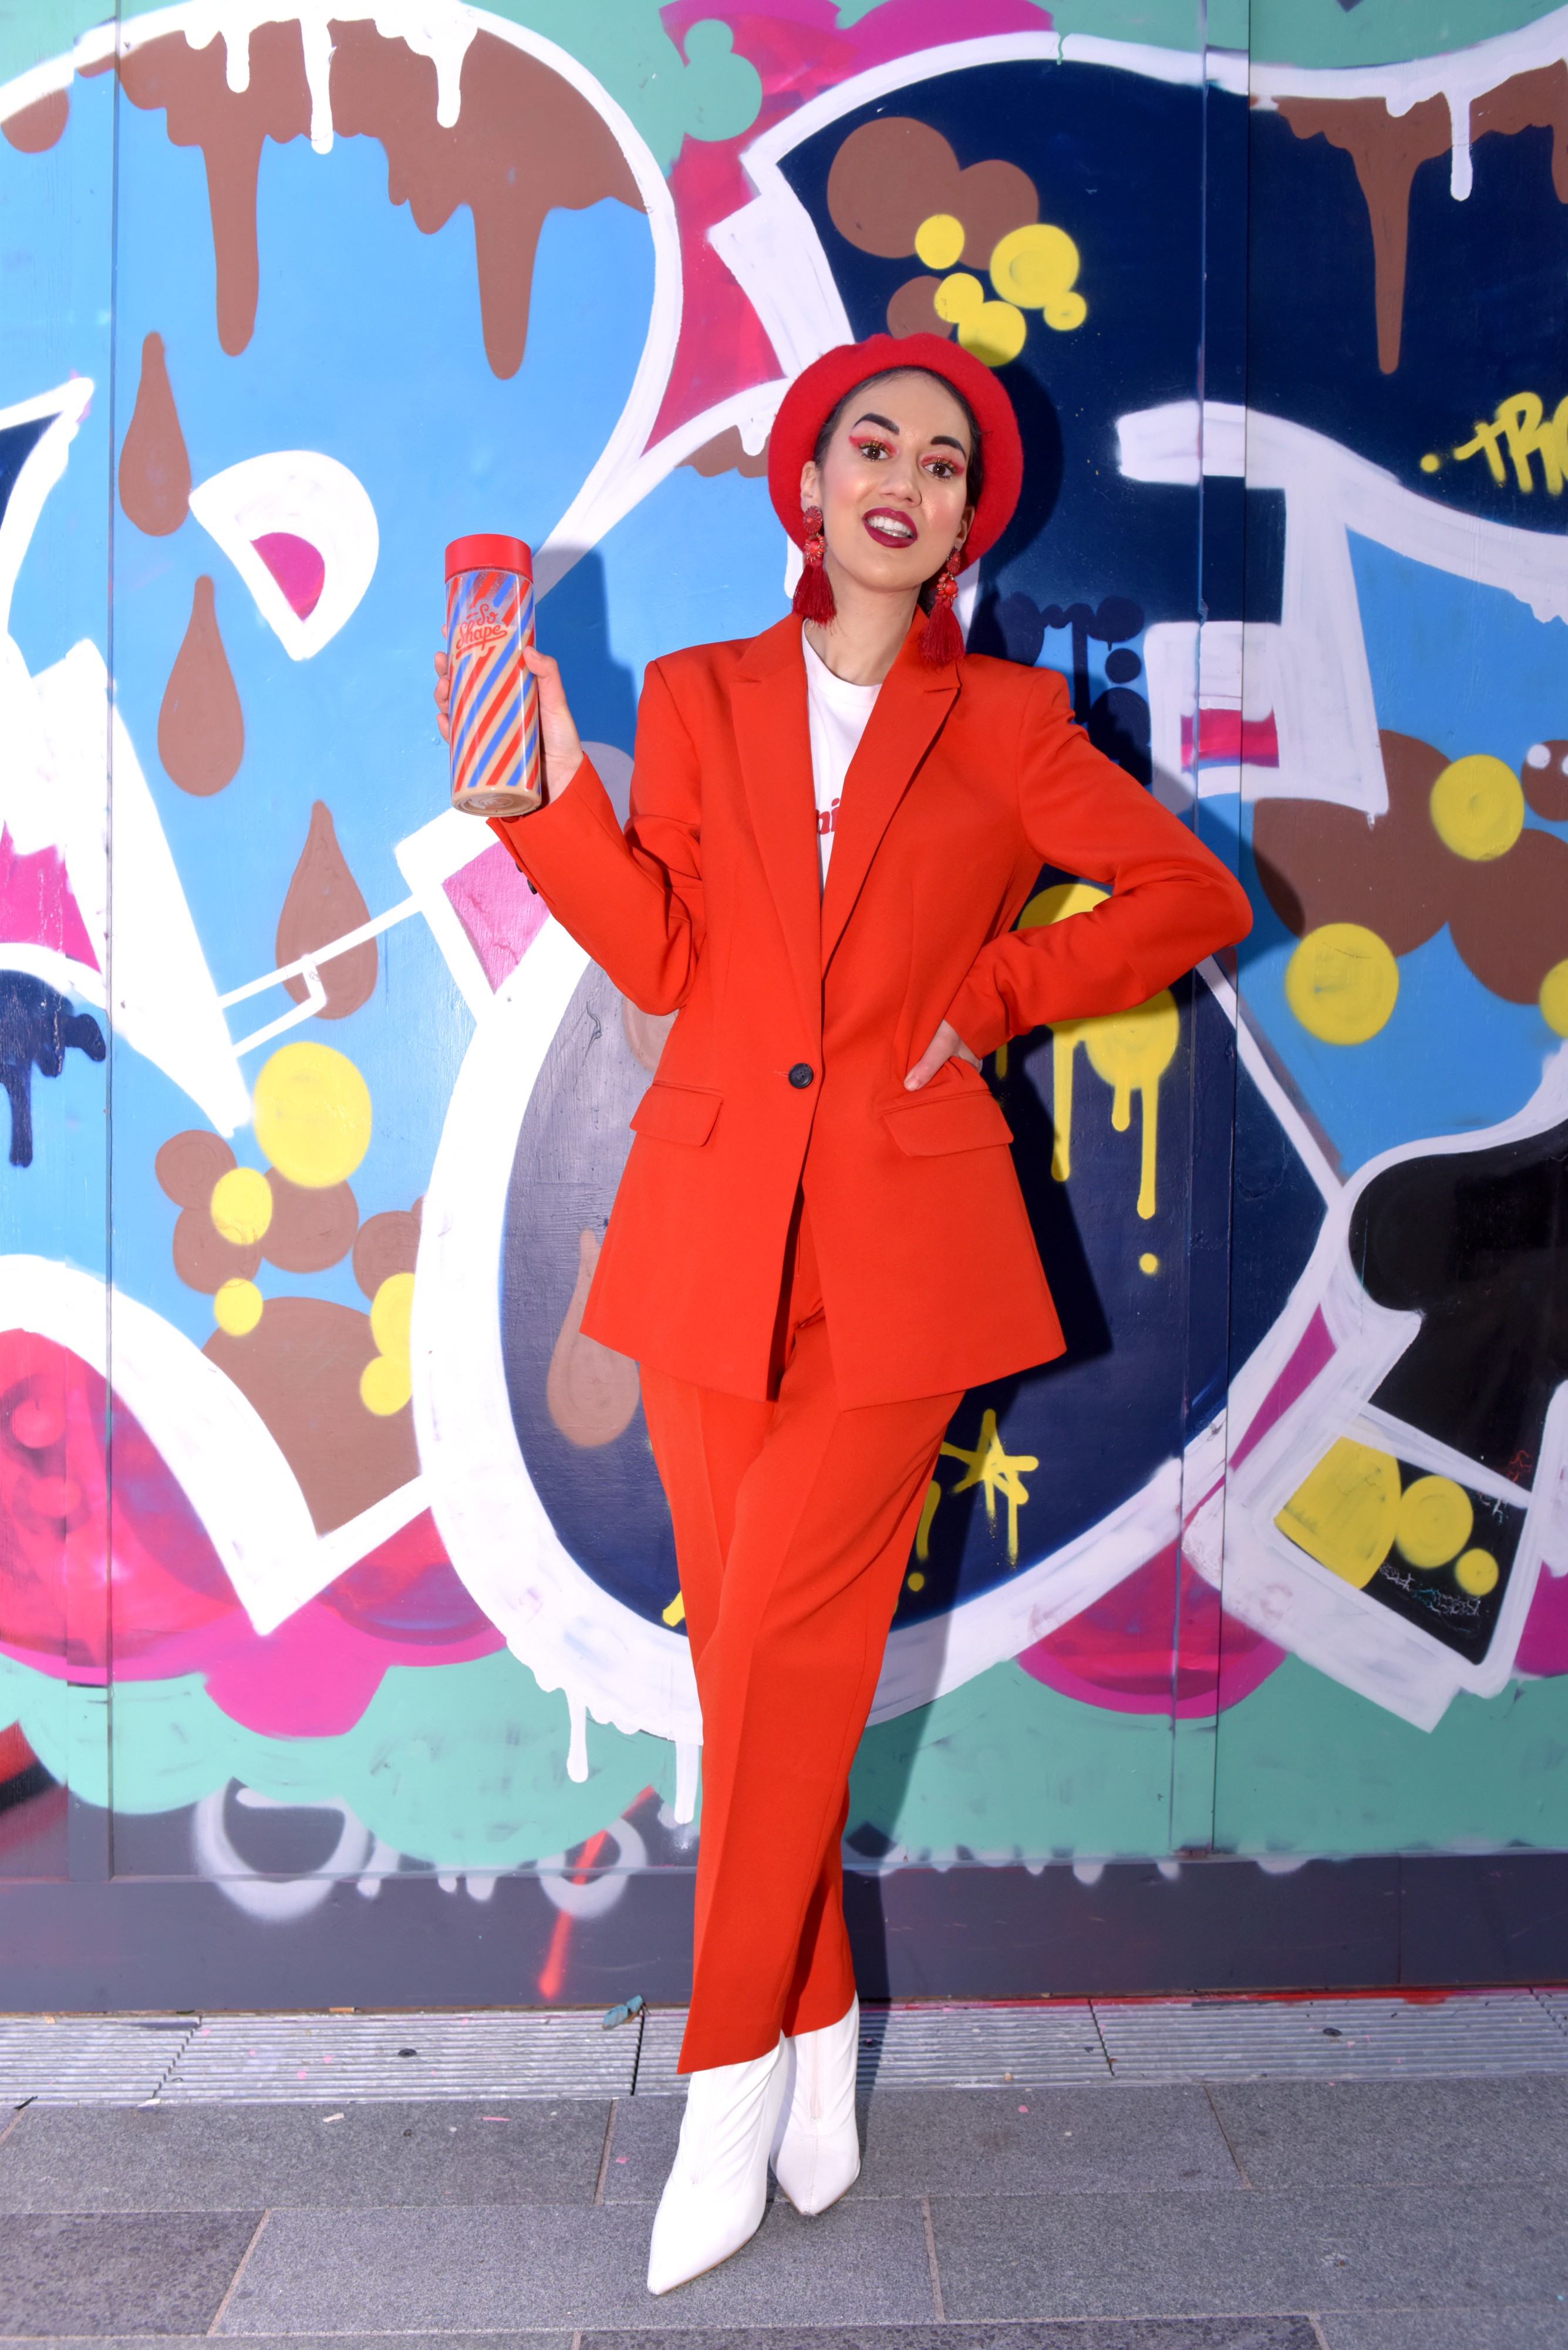 <img src="ana.jpg" alt="ana red trouser suit and so shape"/> 